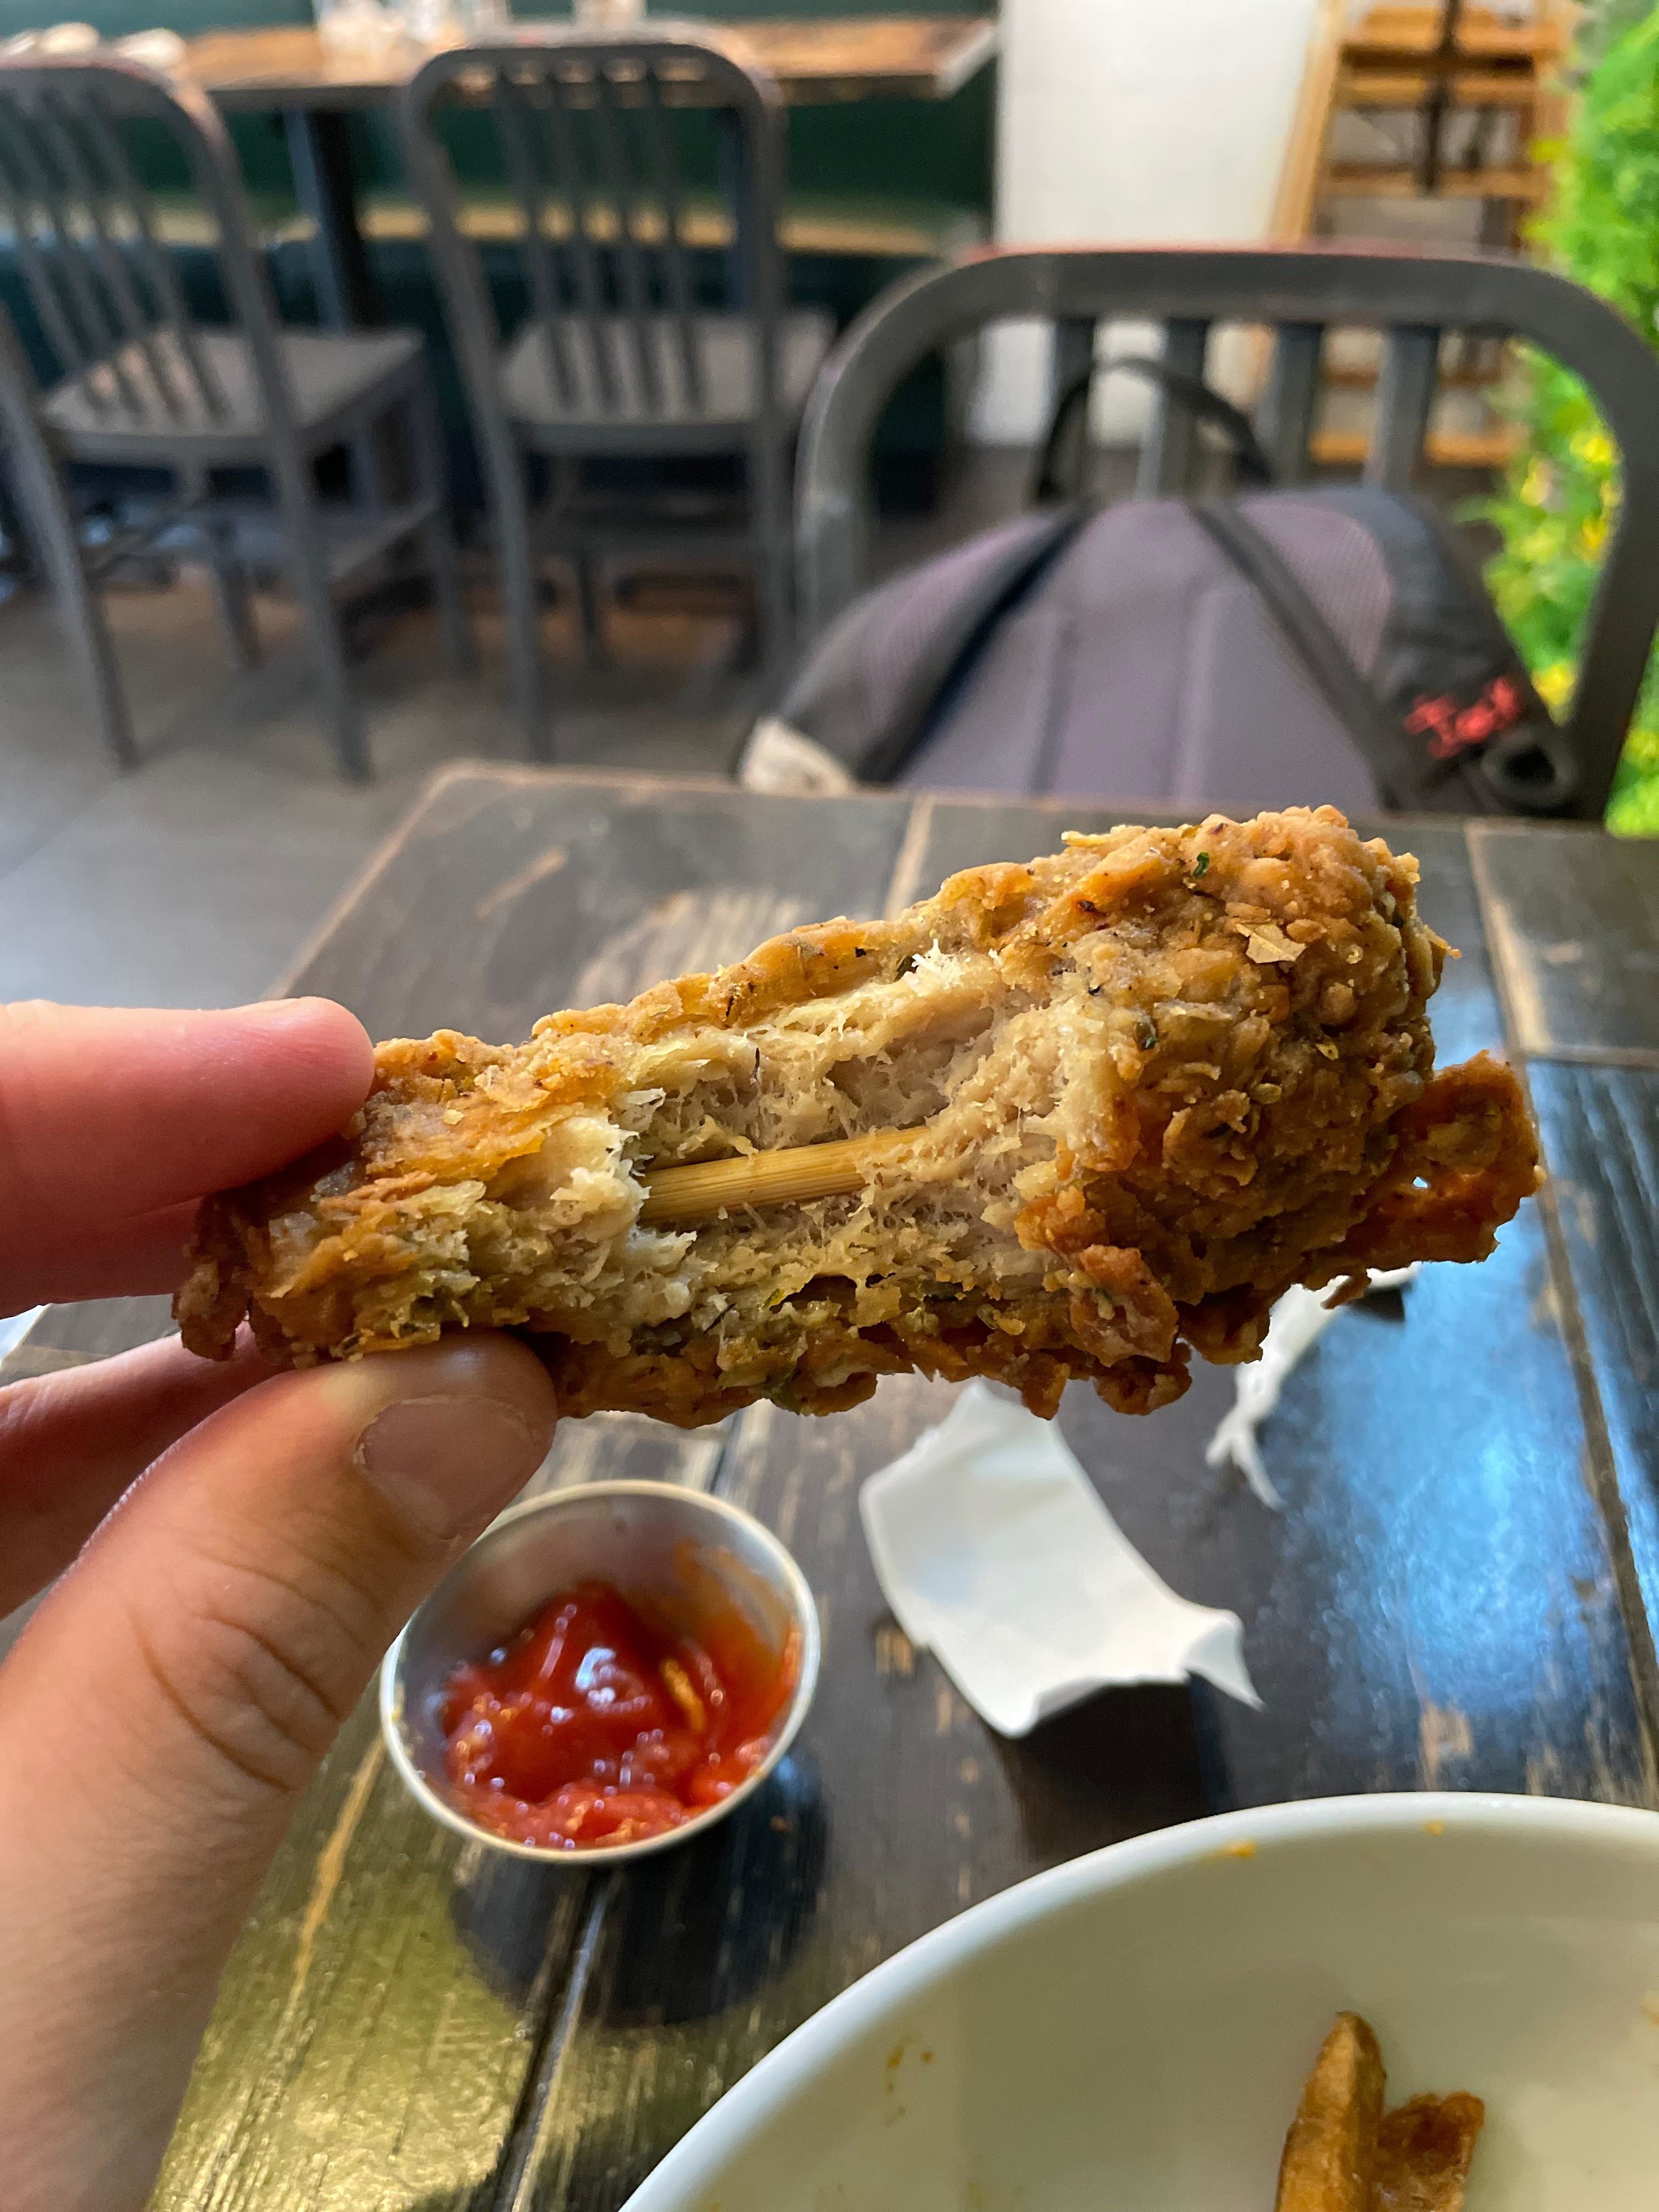 Someone holding a vegan chicken wing with the interior visible, showing a wooden bone